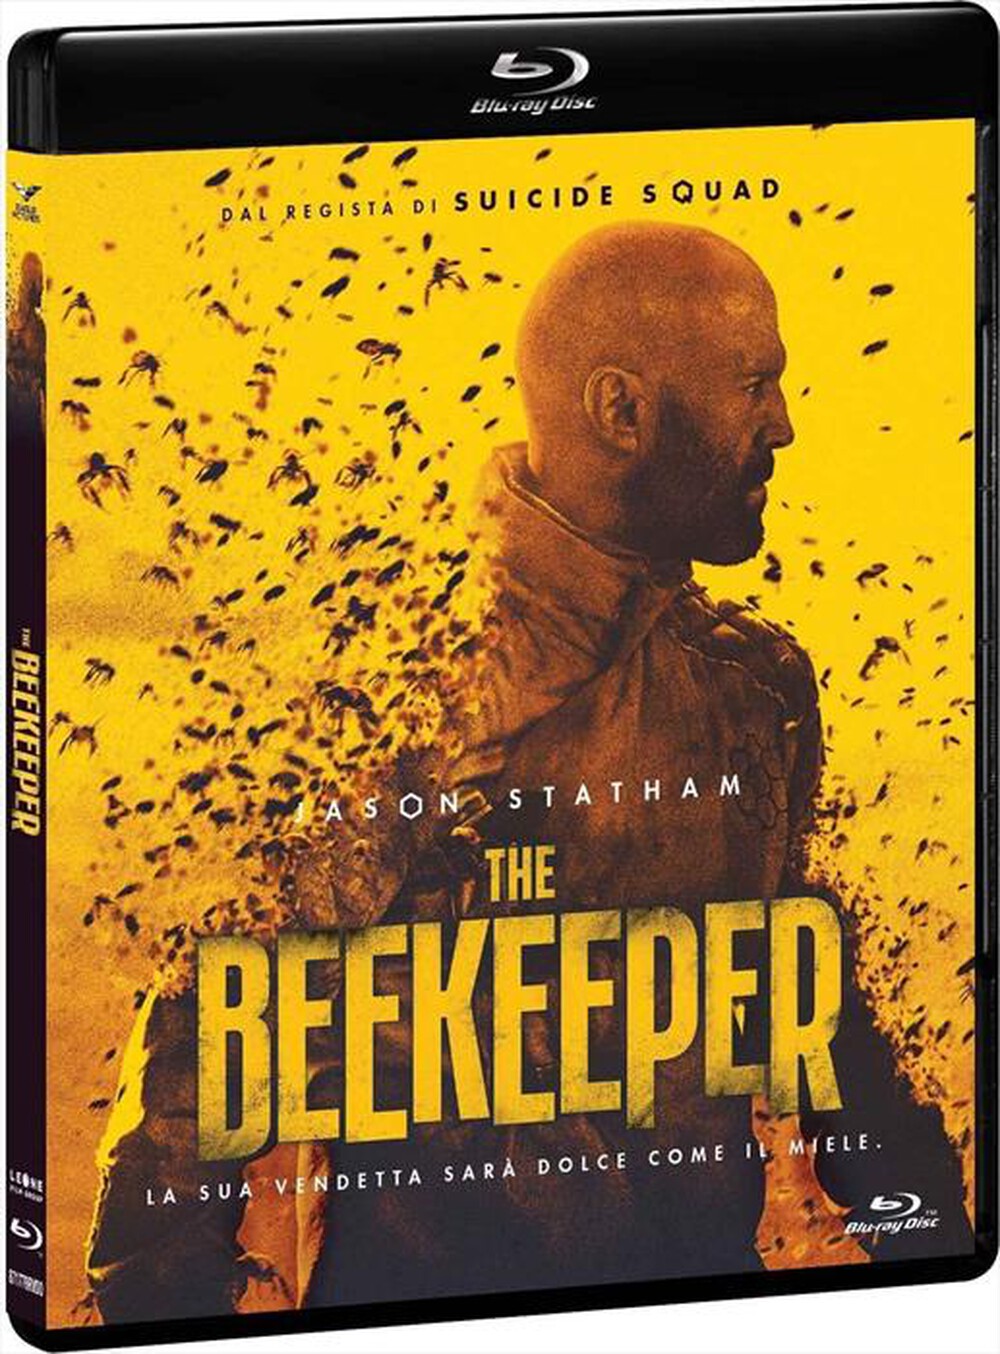 "EAGLE PICTURES - Beekeeper (The)"